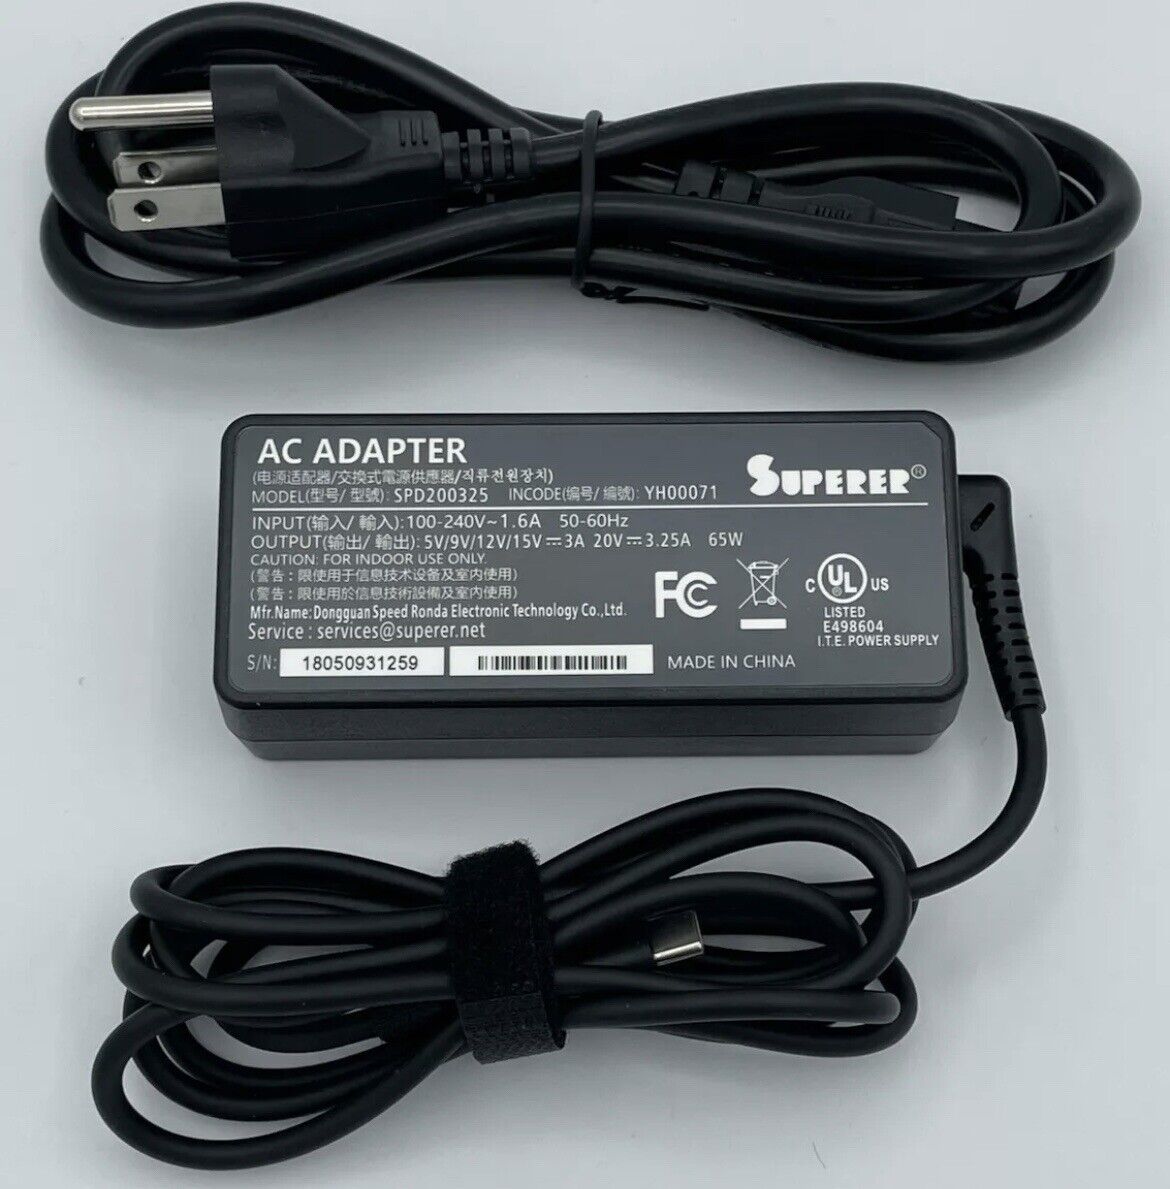 Superer UL Listed AC Charger Fit for Sony LCD TV Power Supply Adapter Cord M70